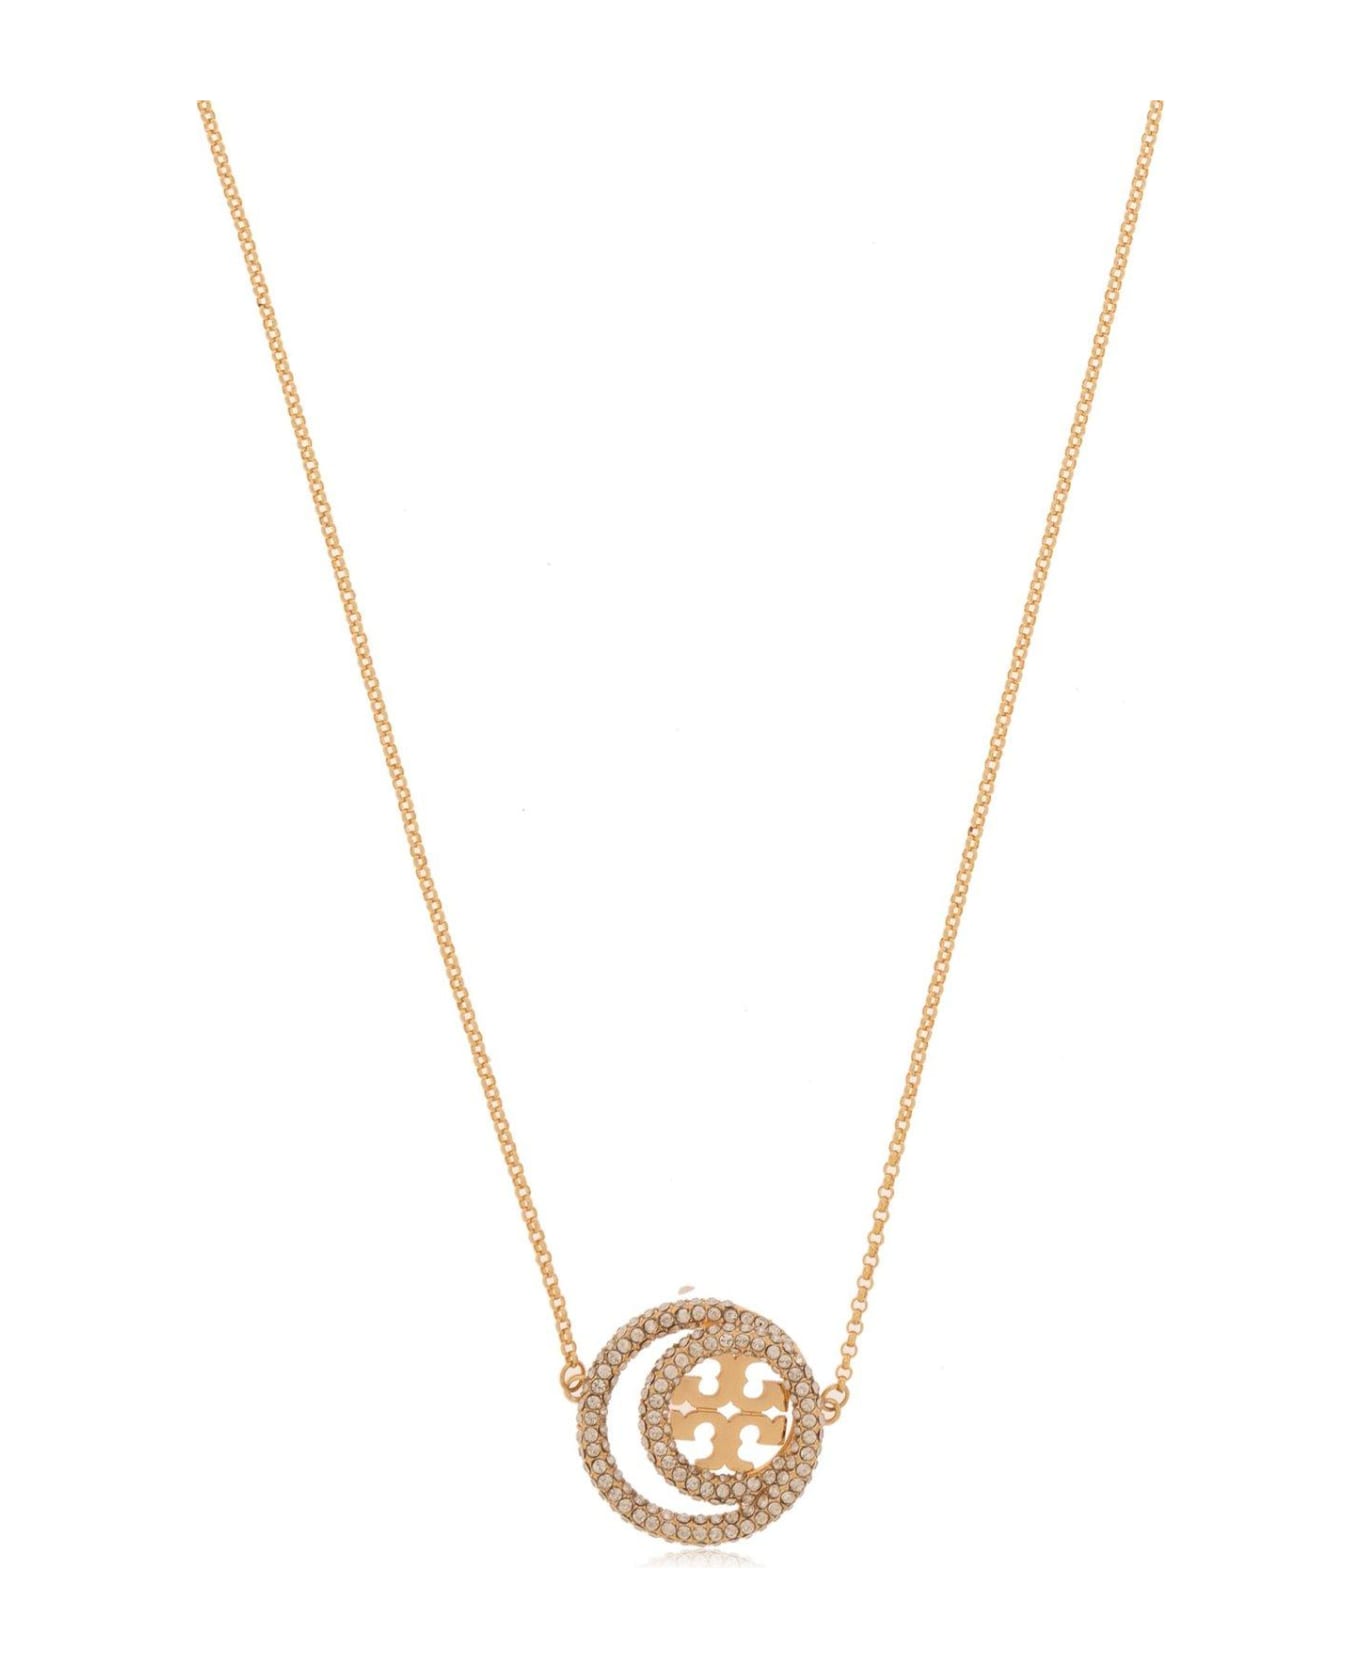 Tory Burch Miller Double Ring Pendant Embellished Necklace - Gold/crystal